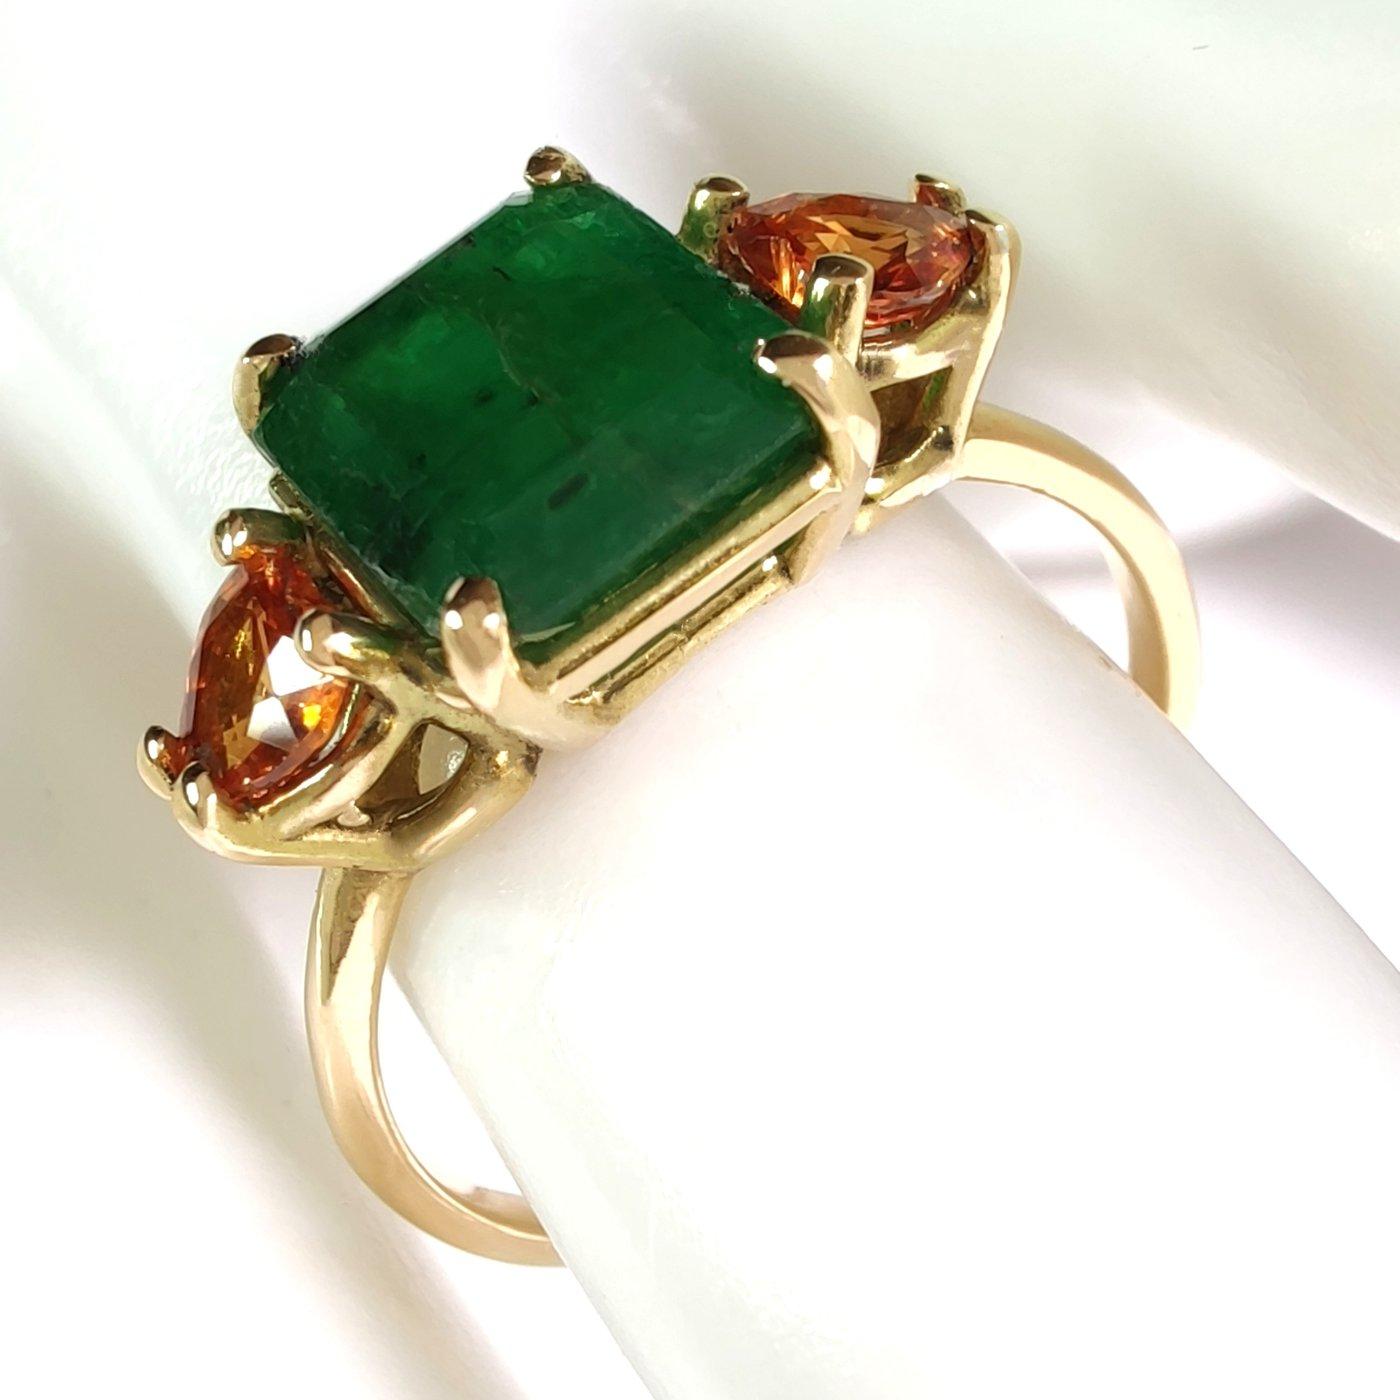 18kt Yellow Gold Ring
American Size: 6.75
European Size: Size 14, Inner Diameter 17

- One Octagonal Cut Emerald
Weight: 2.60
Measurements: 8.9 x 7.1 mm

- Two Heart Cut Citrines
Total Weight: 0.50 ct
Measurements: ø4x3.8 mm


IMPORTANT:

- To